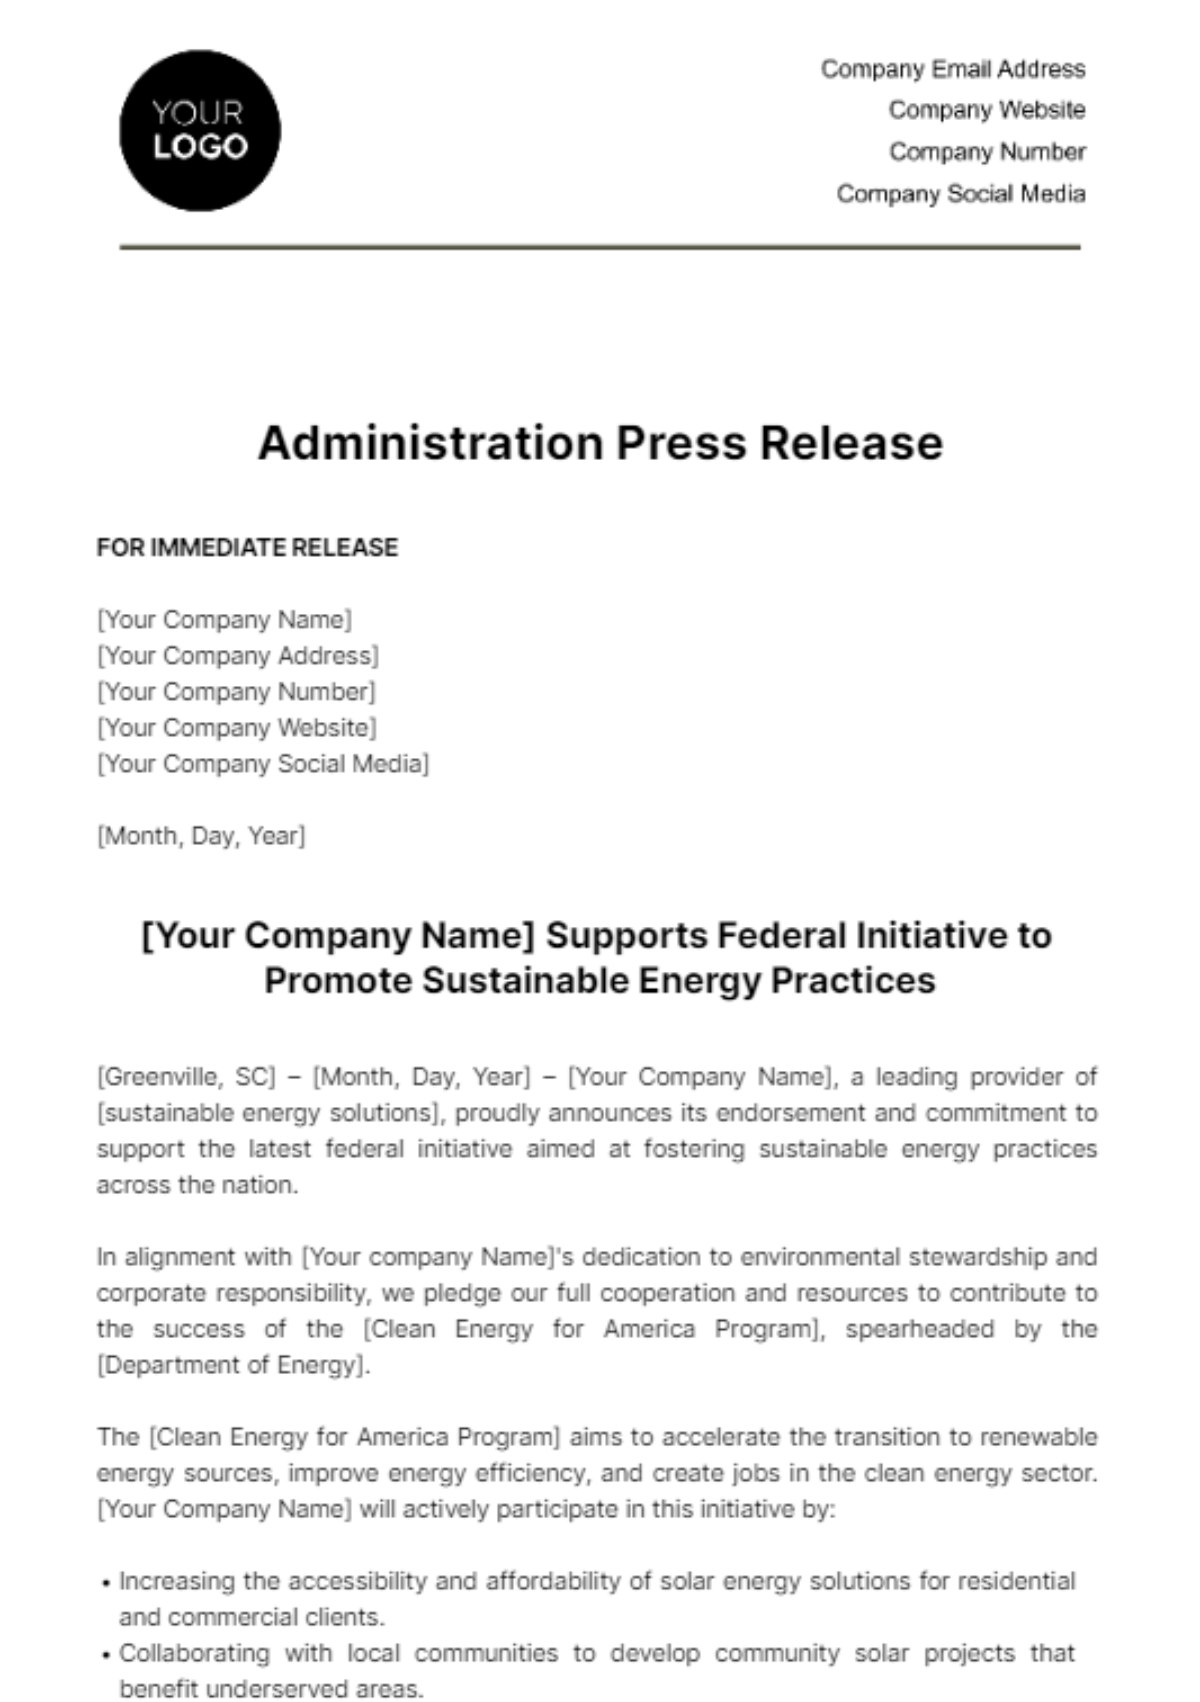 Administration Press Release Template